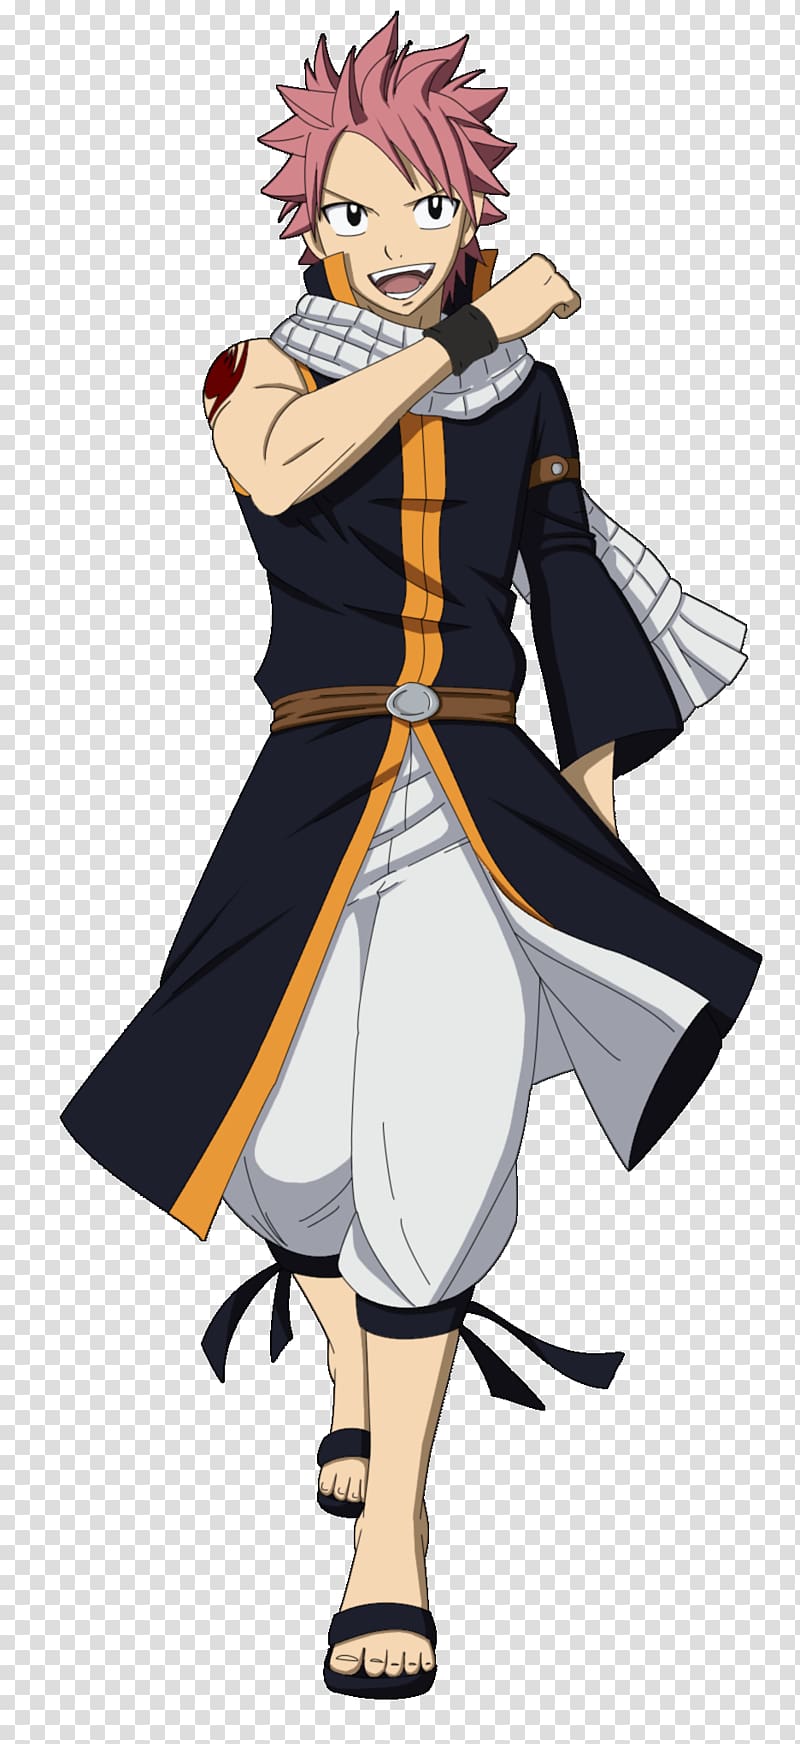 Natsu Dragneel Fairy Tail Anime, fairy tail transparent background PNG clipart